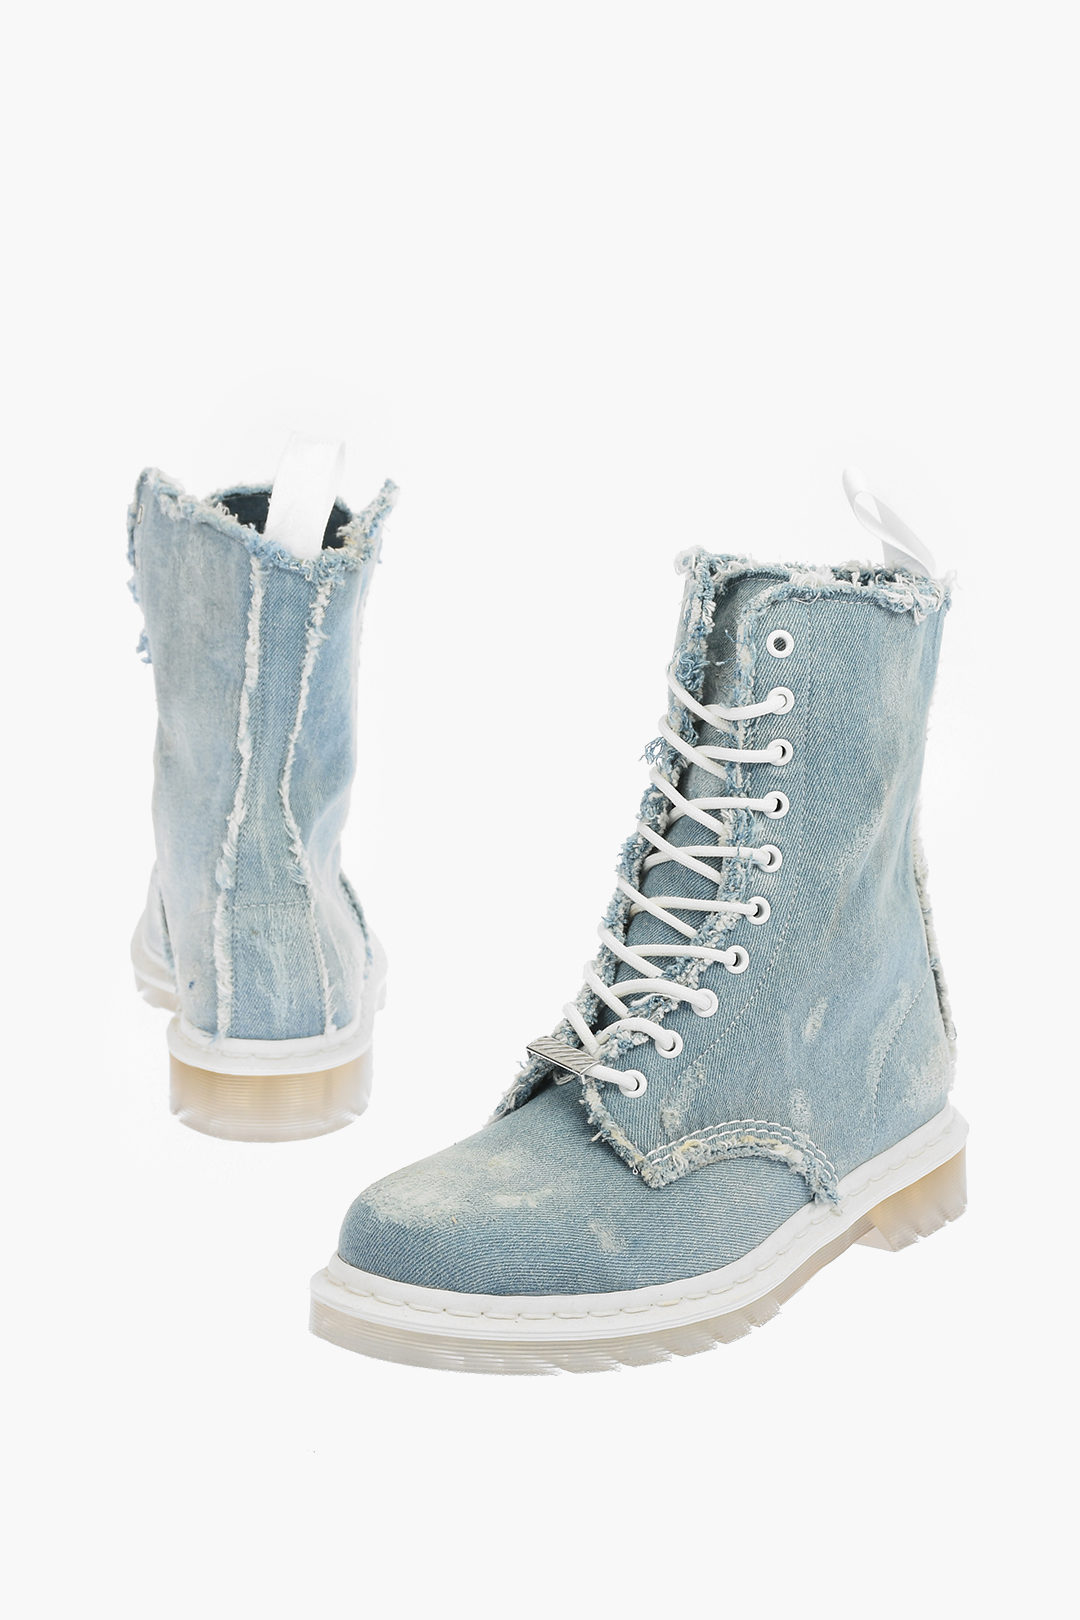 bleached boots men - Glamood Outlet